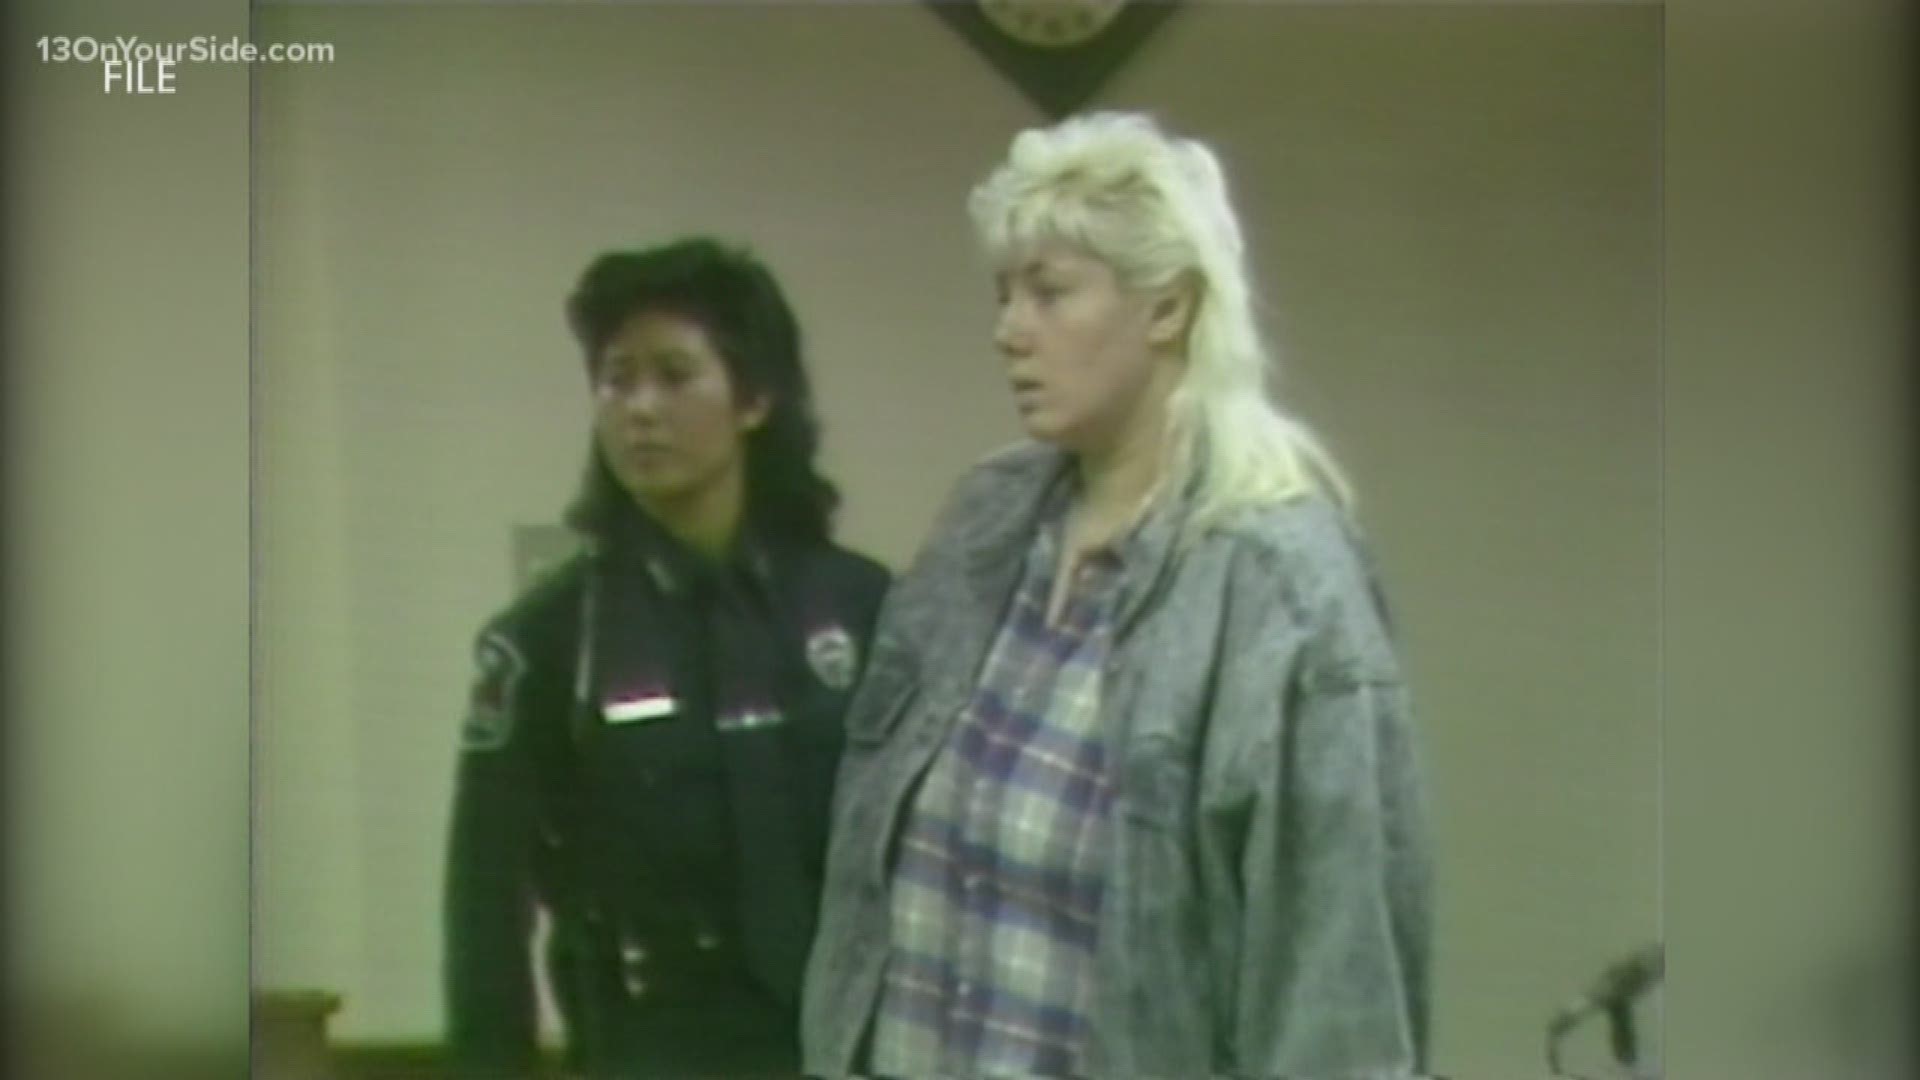 One of the two women convicted of murdering several elderly patients at Alpine Manor has been sent home.